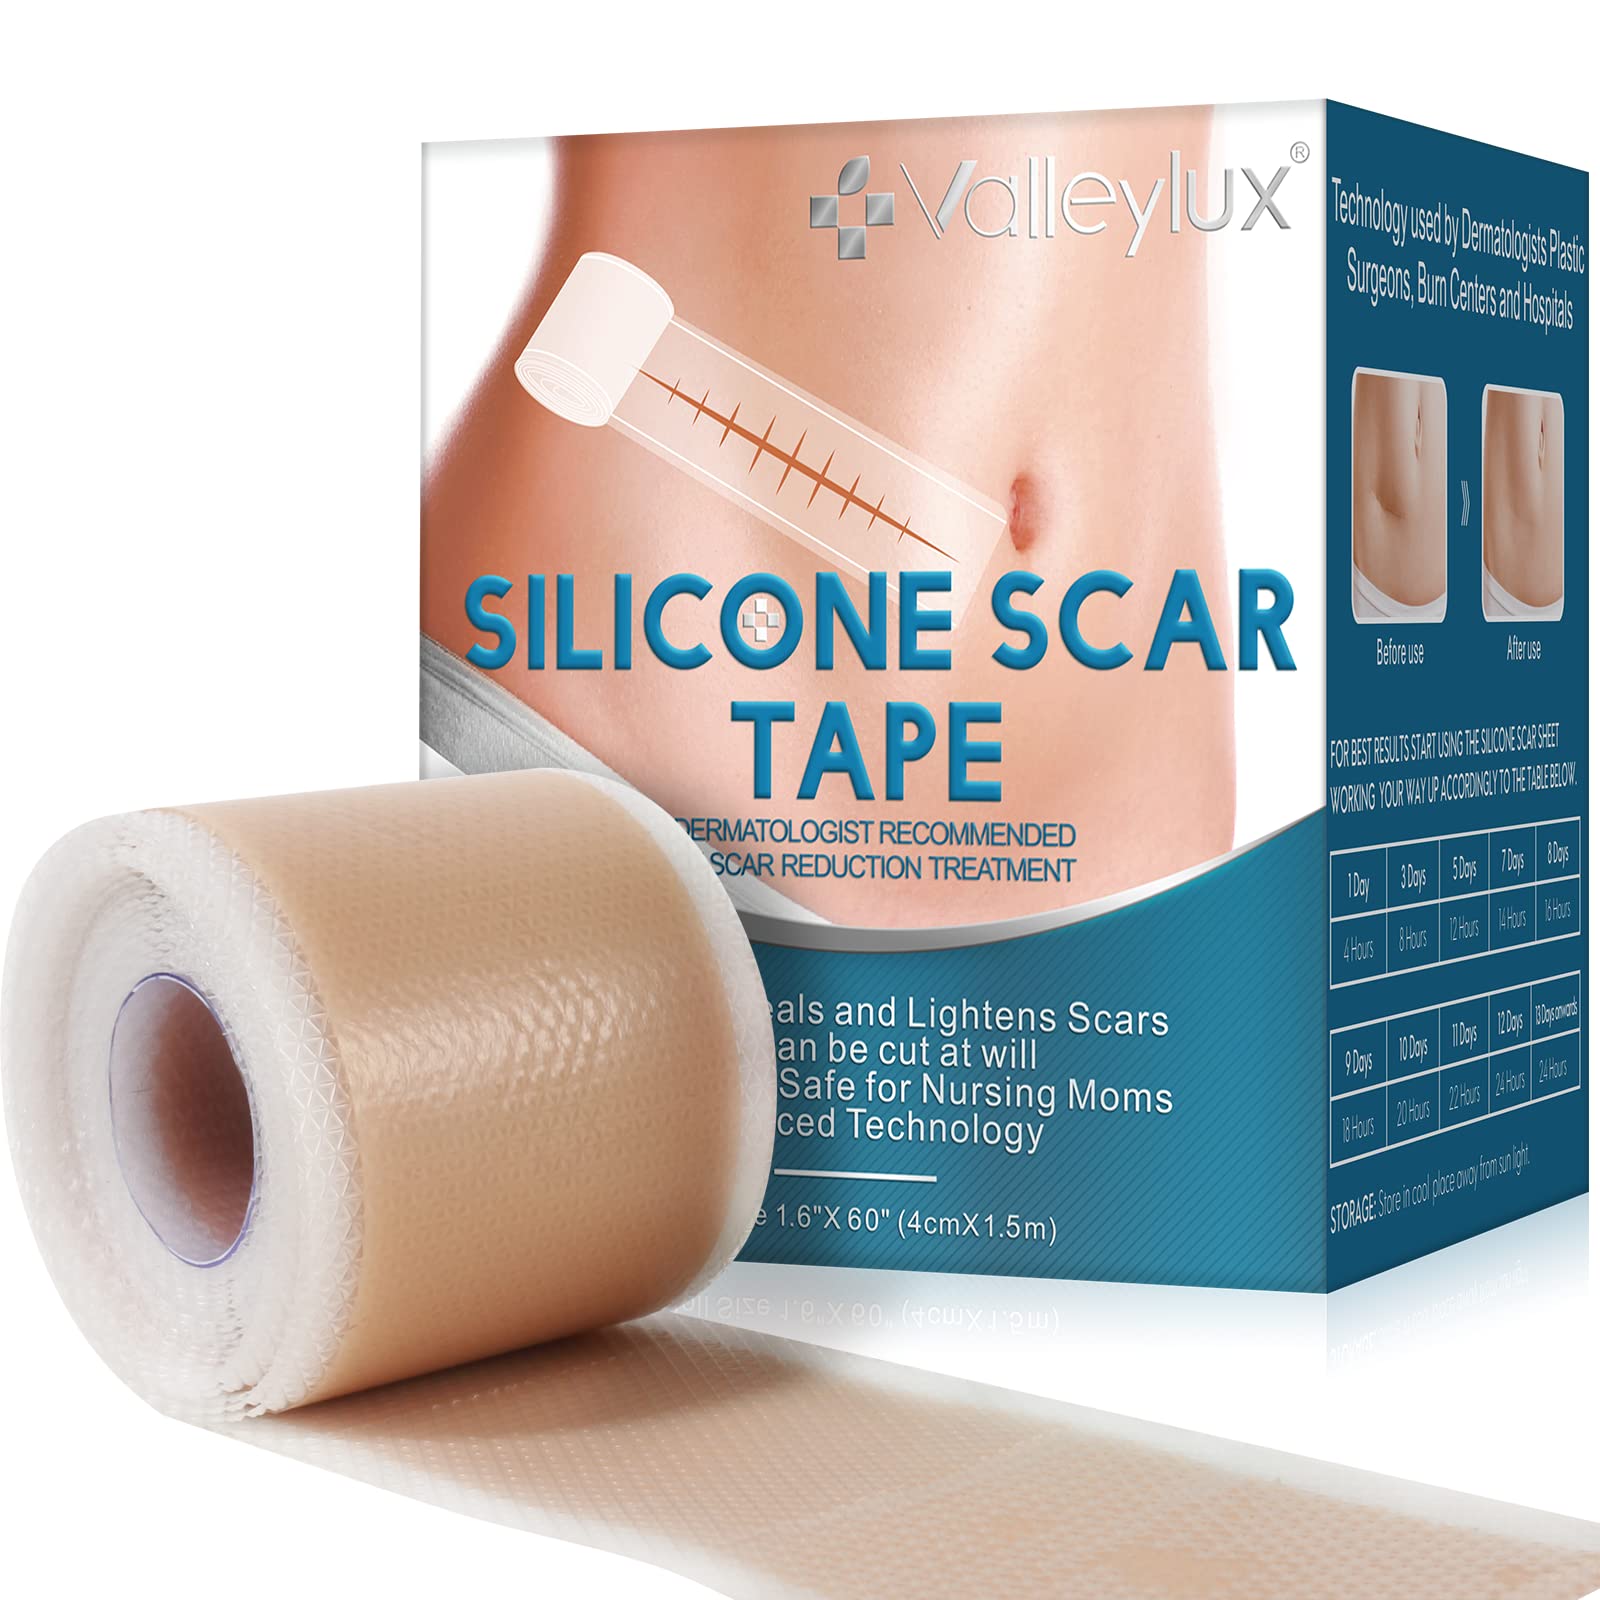 Reusable Silicone Scar Sheets(1.6”x 60”Roll-1.5M),Silicone Scar Roll,Scar Silicone Tape Strips,Professional Scar Removal Sheets for C-Section, Surgery, Burn, Keloid, Acne